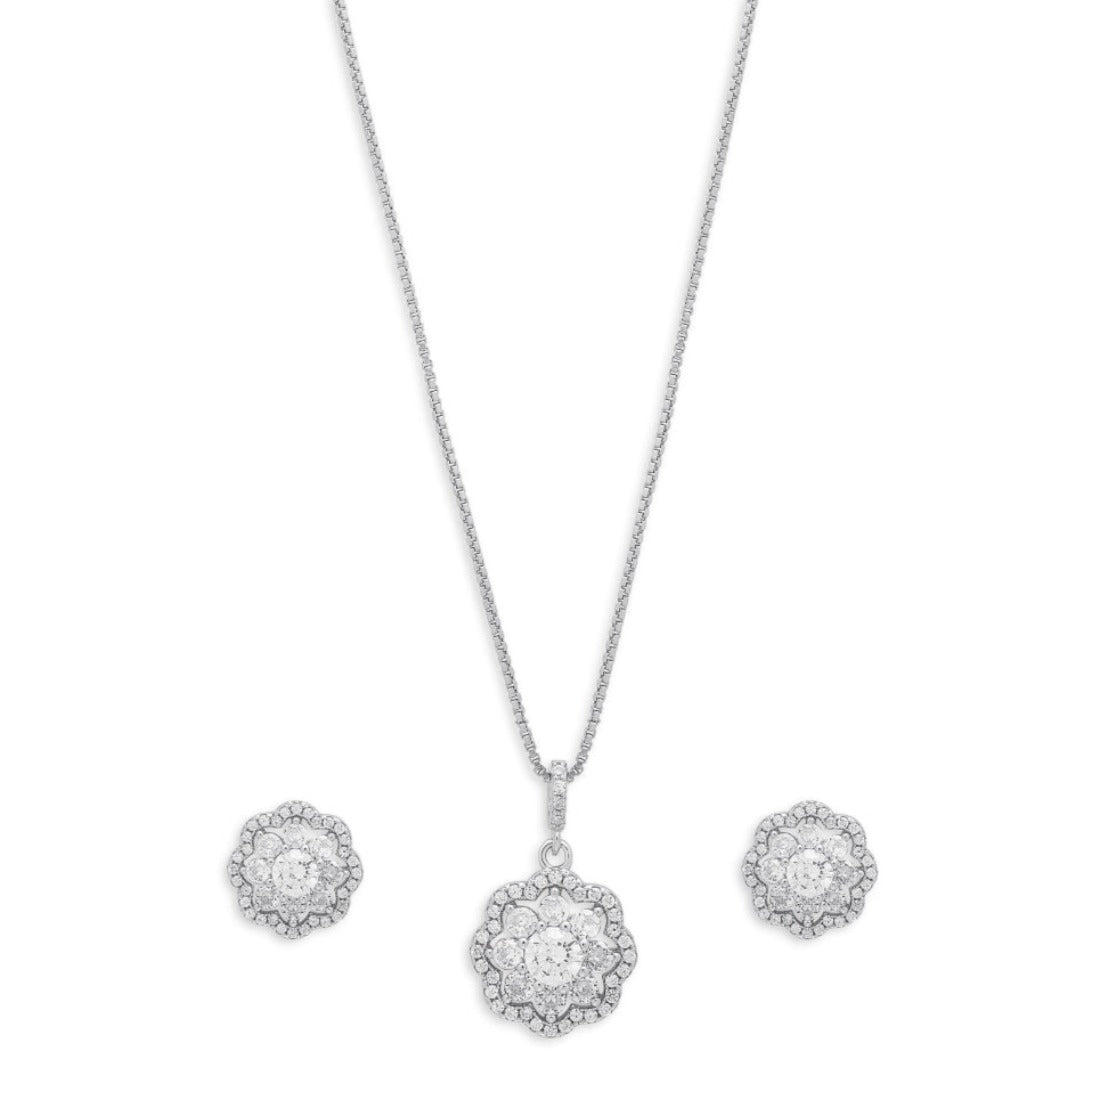 Radiant Blossom Rhodium Plated 925 Sterling Silver Jewelry Set